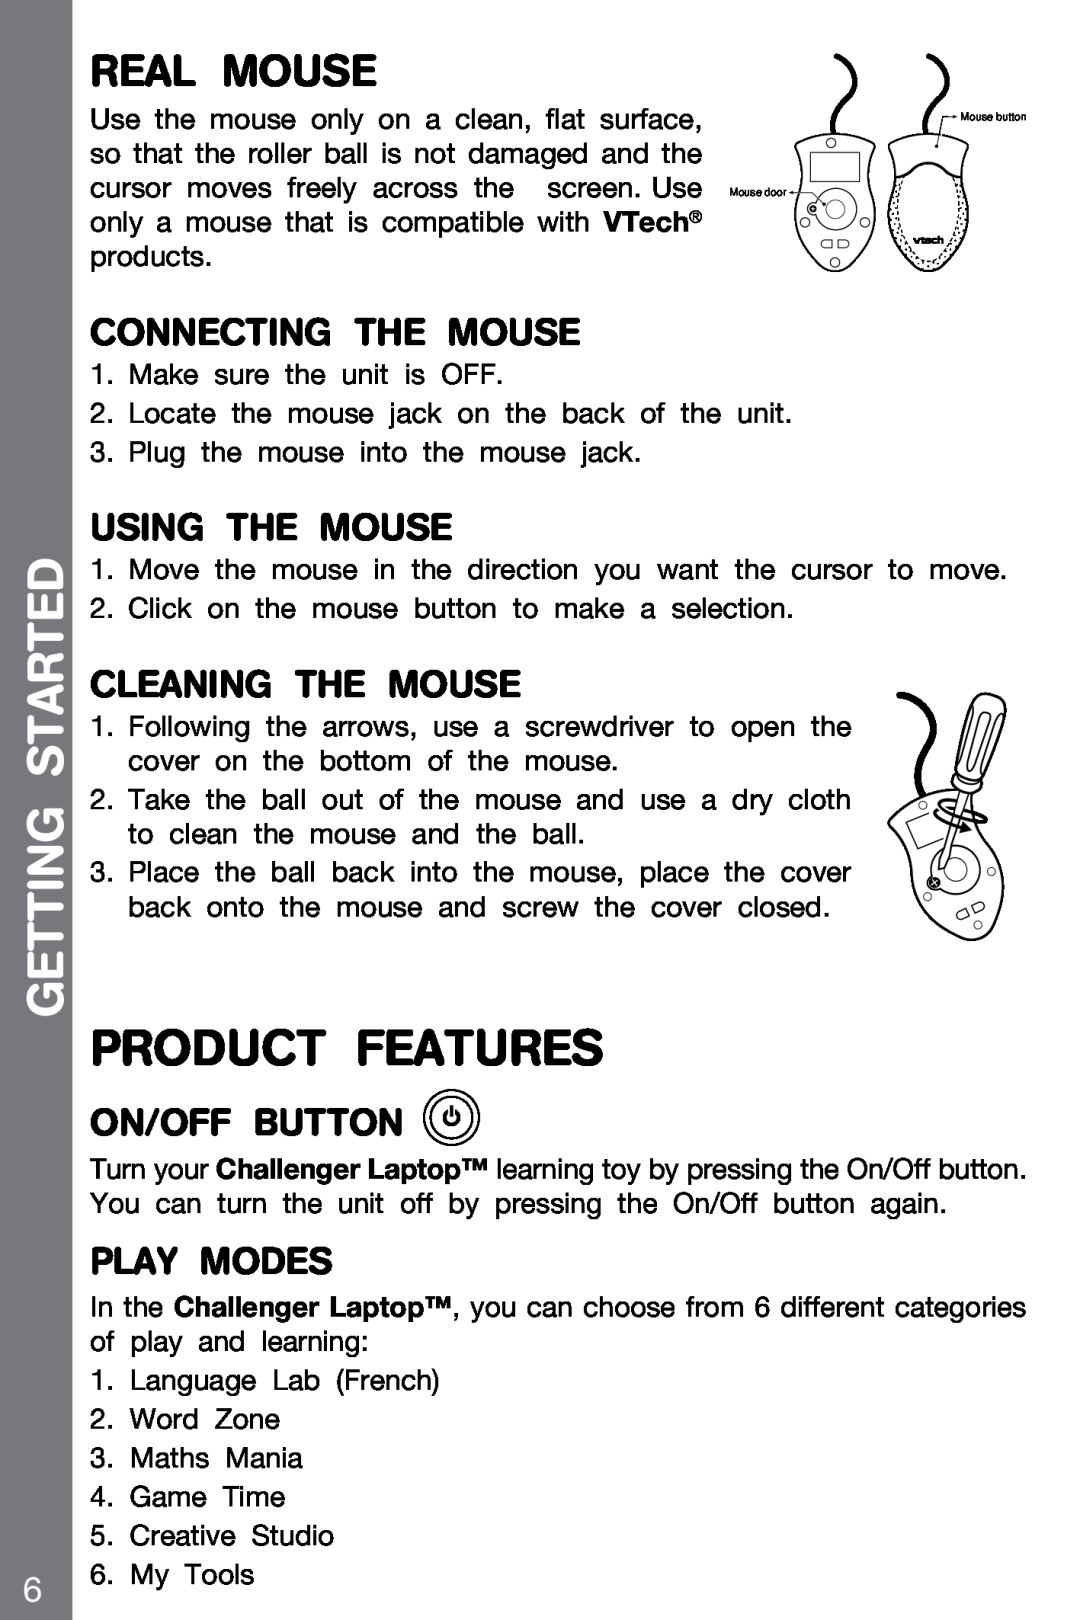 VTech 91-002136-014-000 user manual Product Features, Real MOUSE, Connecting The Mouse, Using The Mouse, Cleaning The Mouse 